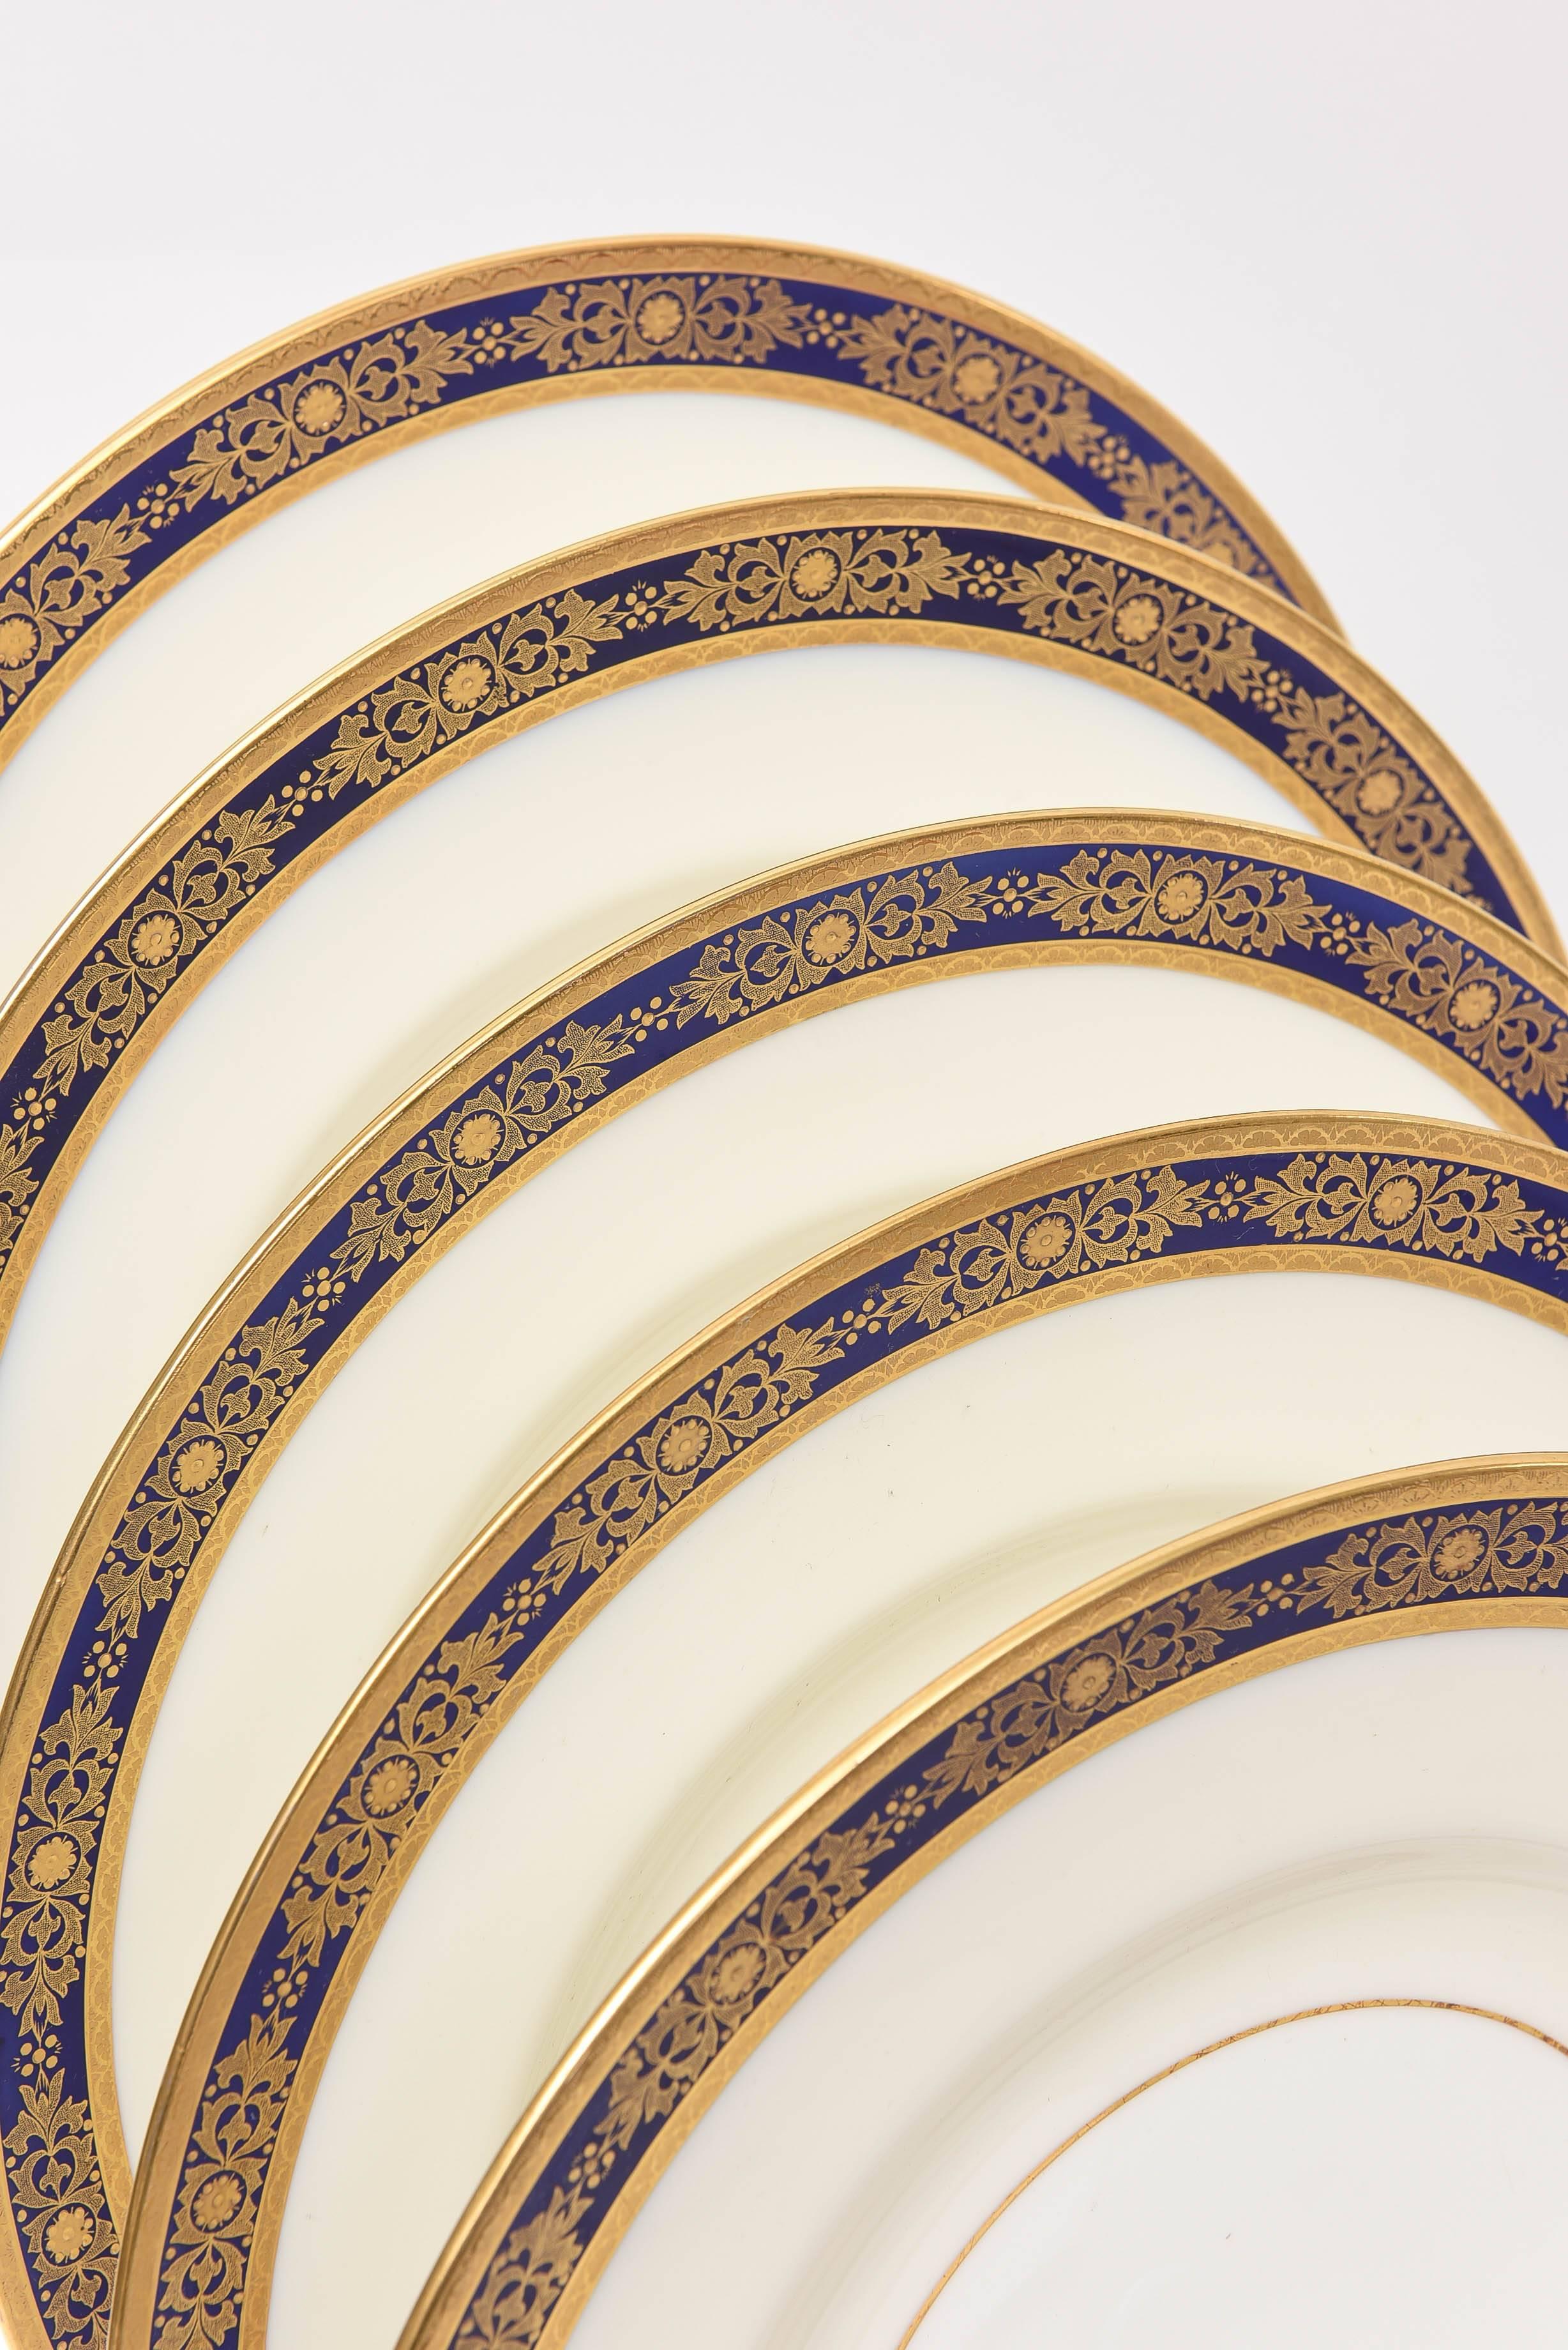 A set of 12 dinner plates by one of our favorite makers, Minton England. Custom ordered and made for Tiffany. These 12 plates feature 2 crisp 24k acid etched gilt bands with a nice design of raised tooled gold in a cobalt blue band on its collar. An